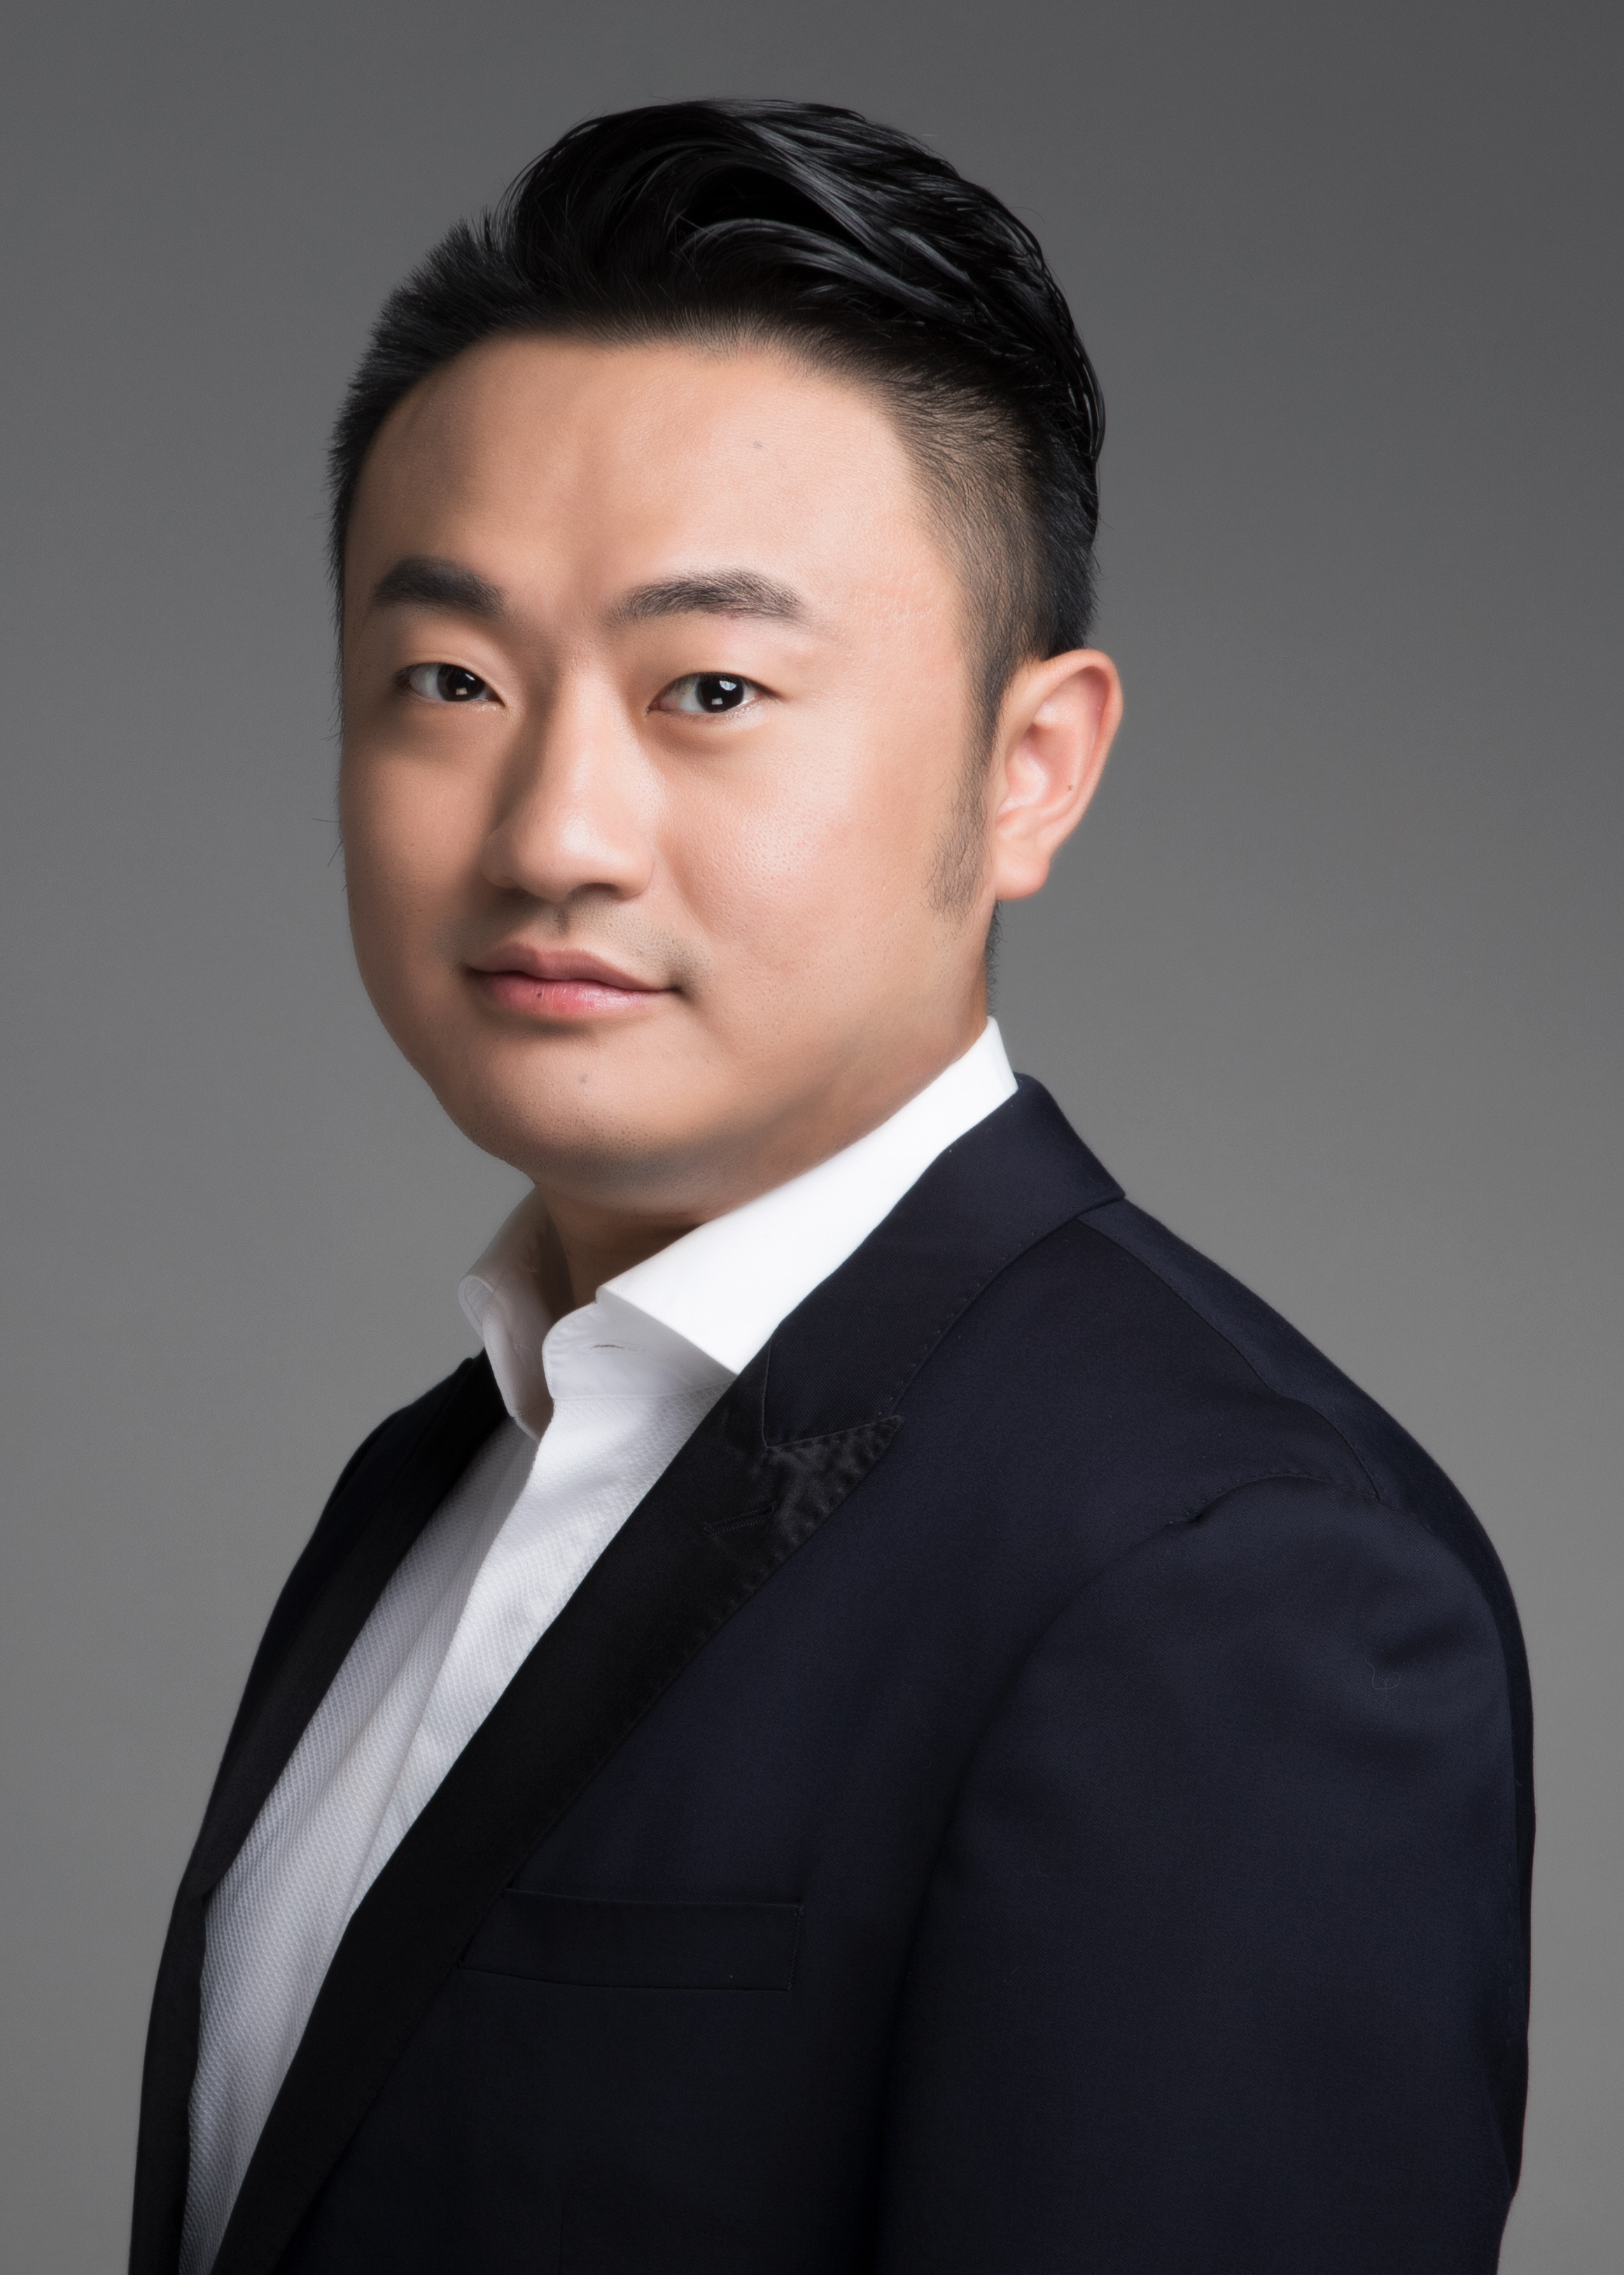 Ben Zhou, co-founder and CEO of Bybit.